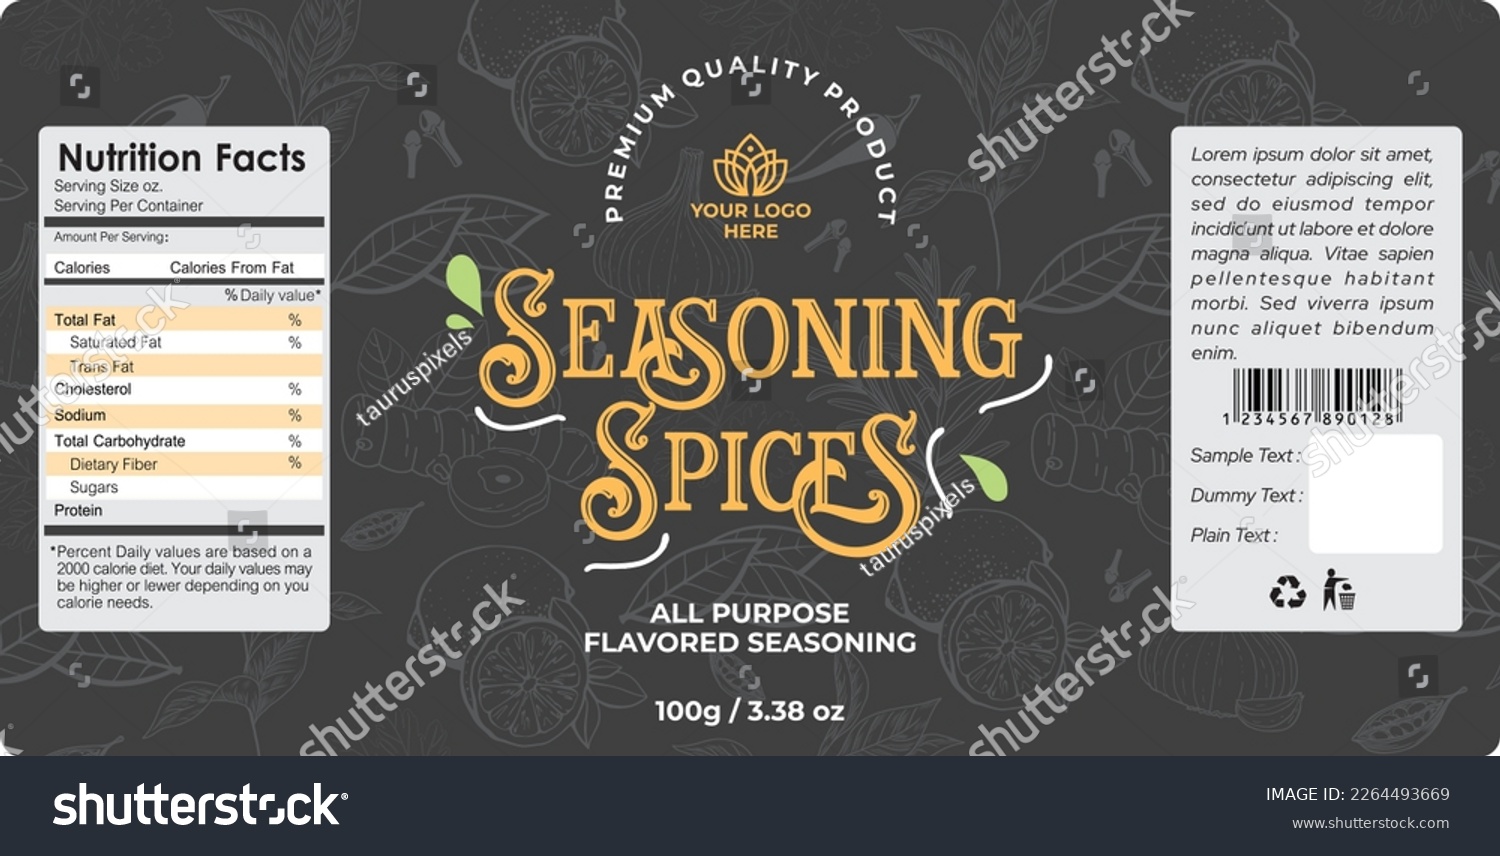 Spice Label Design Template. Seasoning herbs and spice packaging Design. Lemon, Cardamom, Garlic, pepper and mint organic spices product vector illustration. Luxury Spice Seasoning Jar Label Design #2264493669